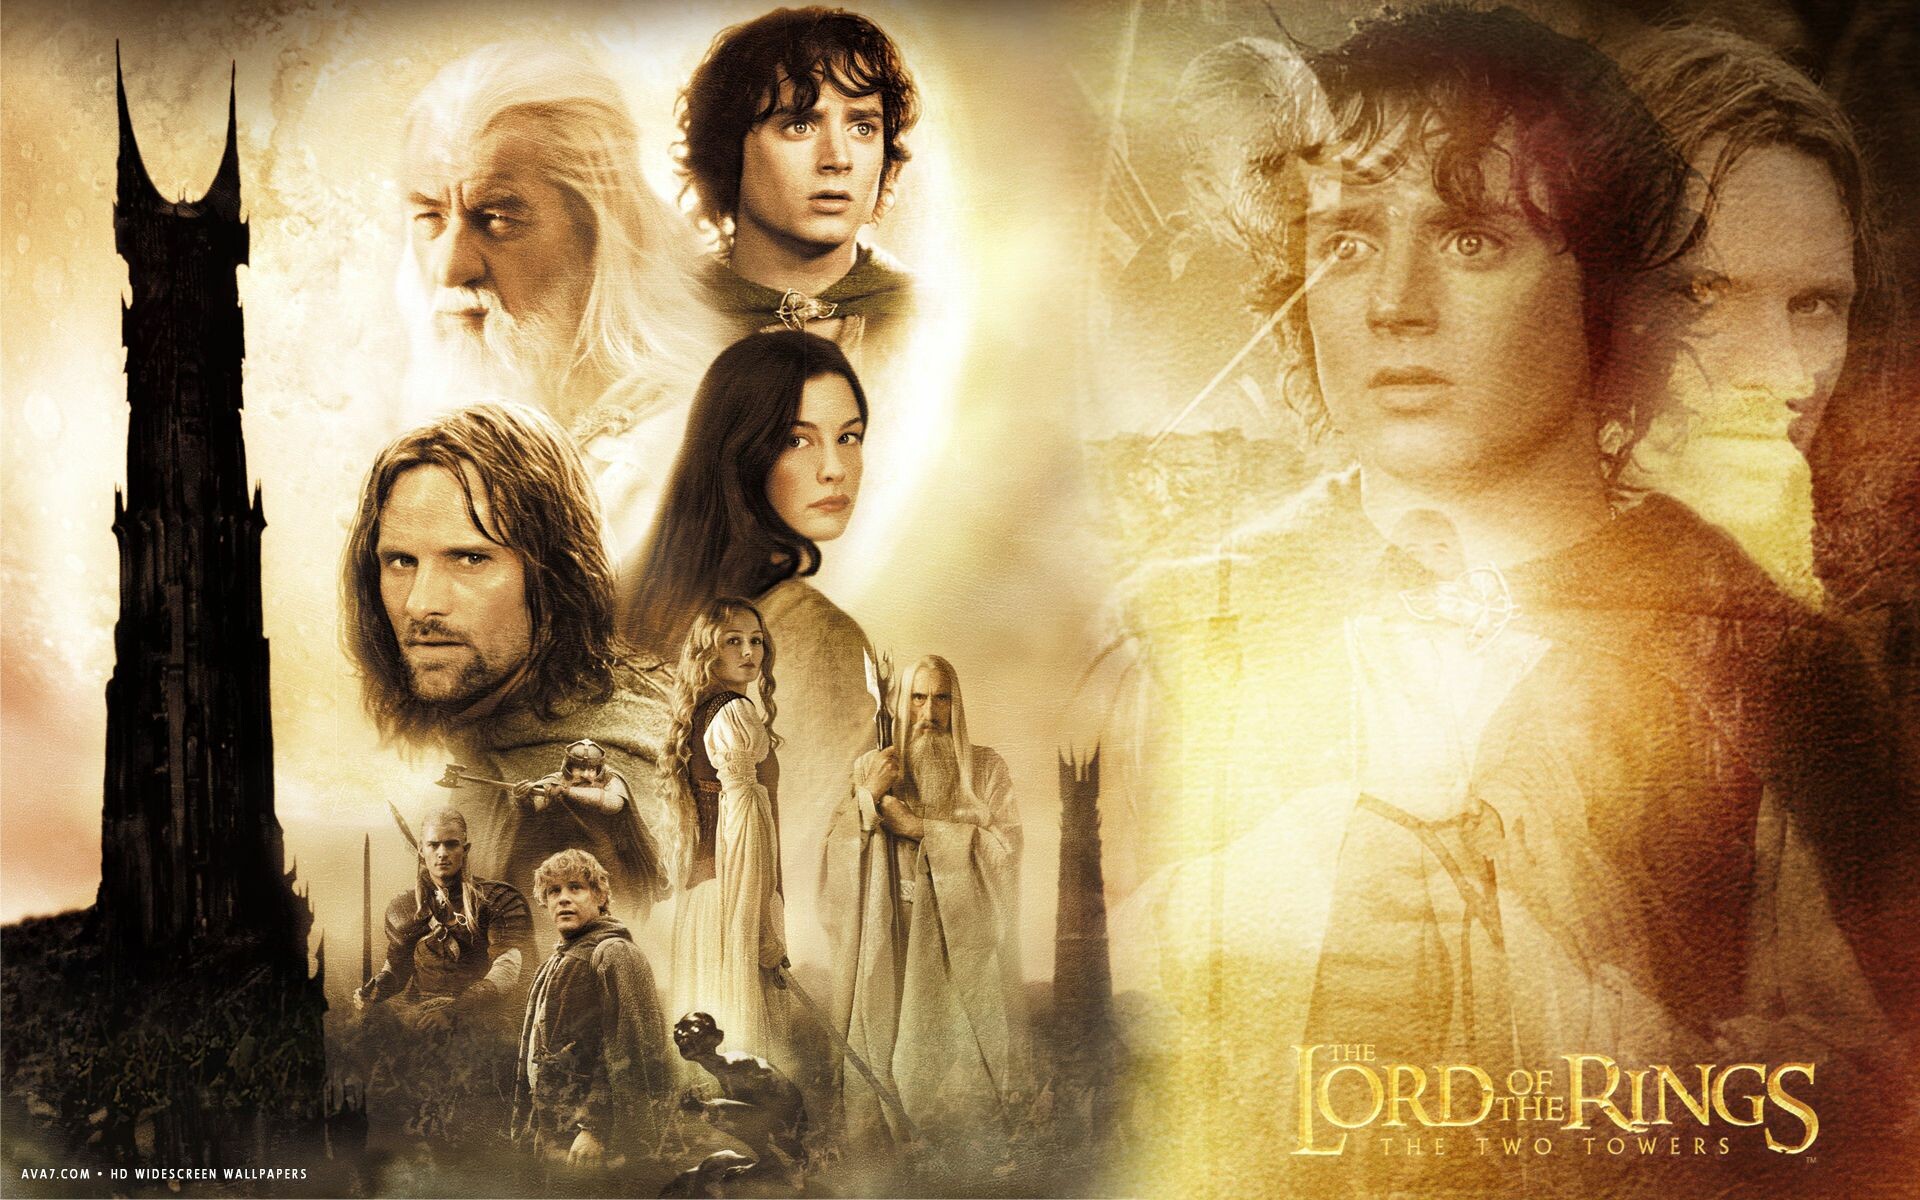 The Lord of the Rings: The Two Towers, A 2002 epic fantasy adventure film directed by Peter Jackson. 1920x1200 HD Wallpaper.